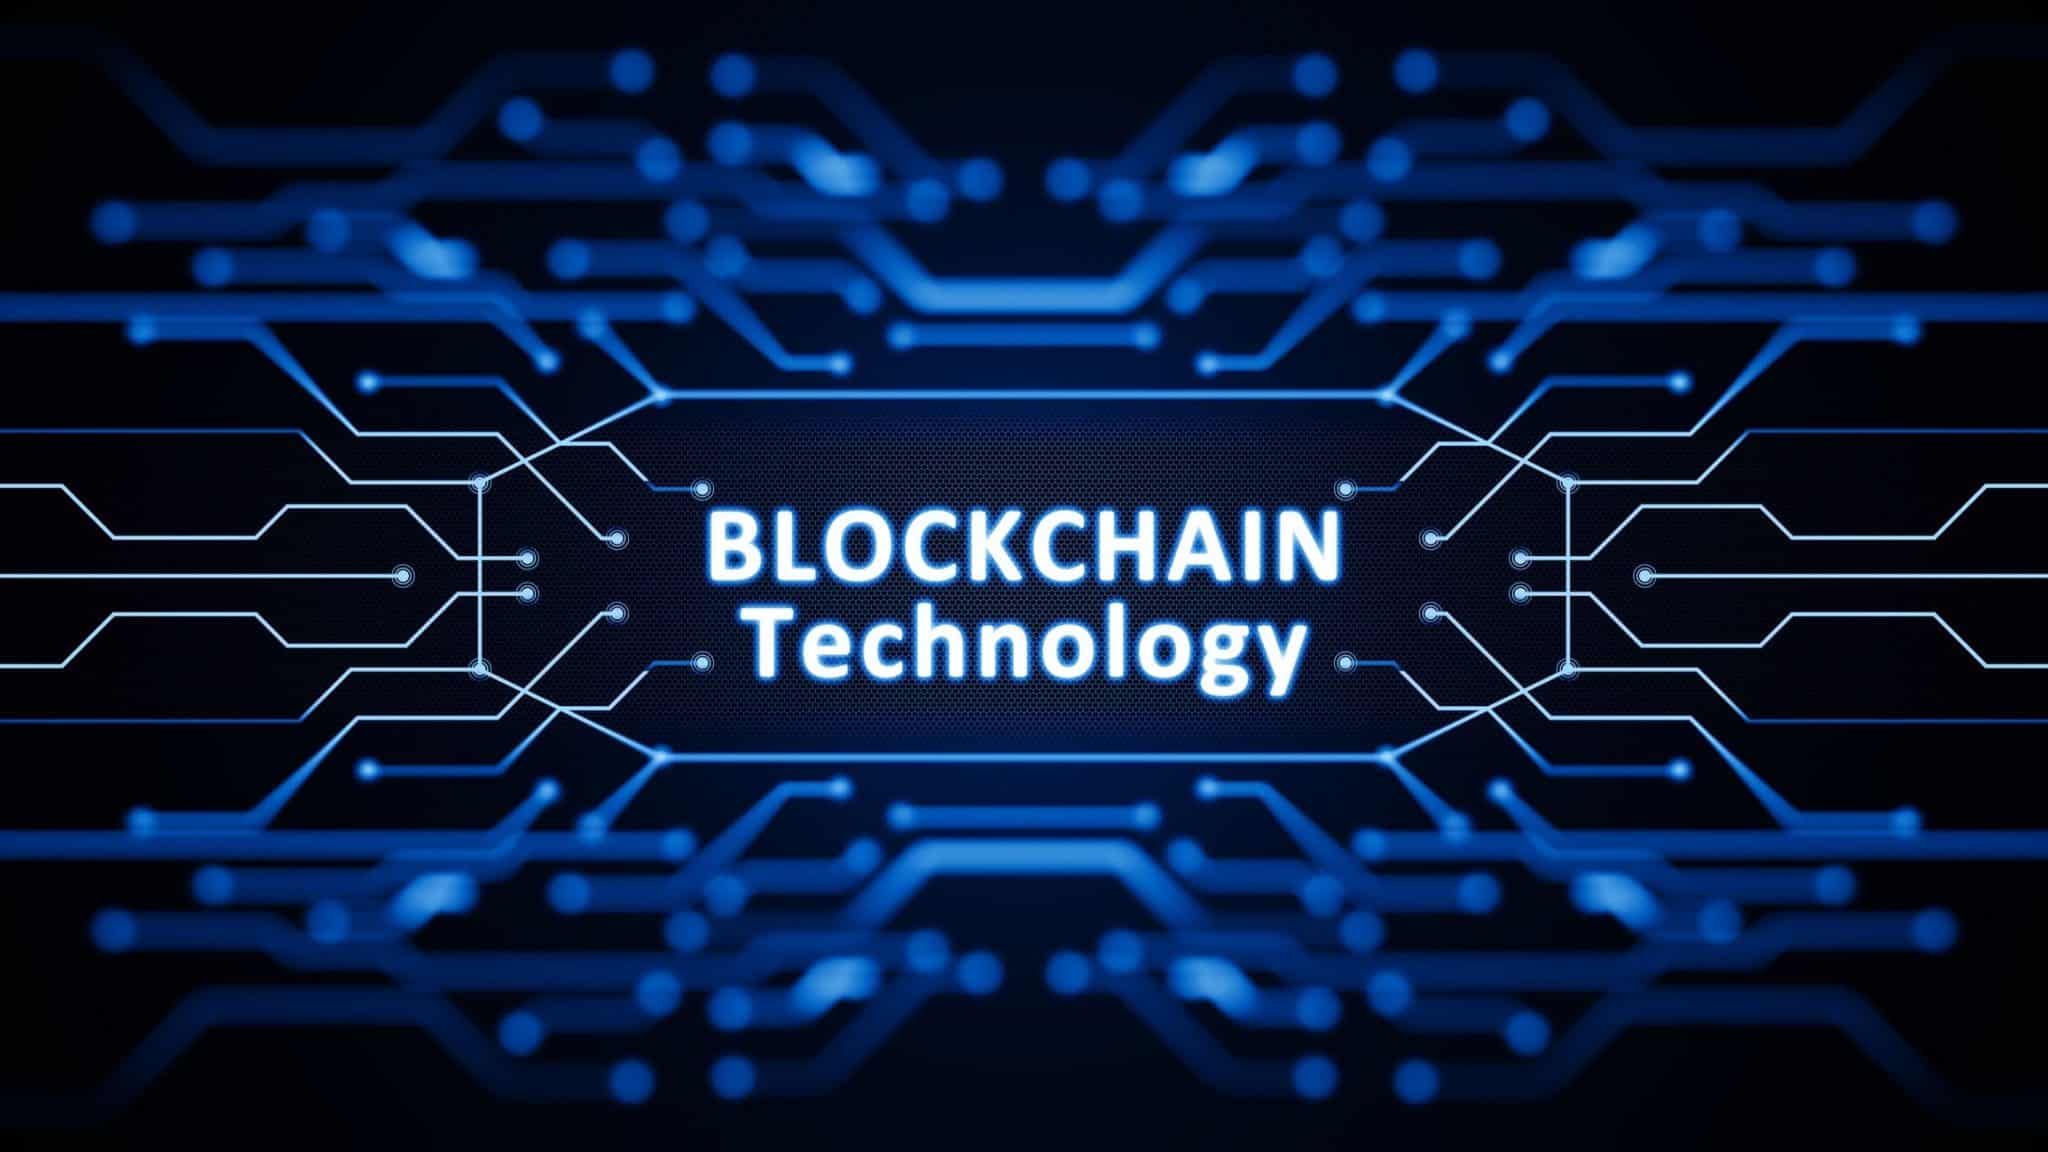 Helmsley Spear Accepts the Great Potential of Blockchain Technology